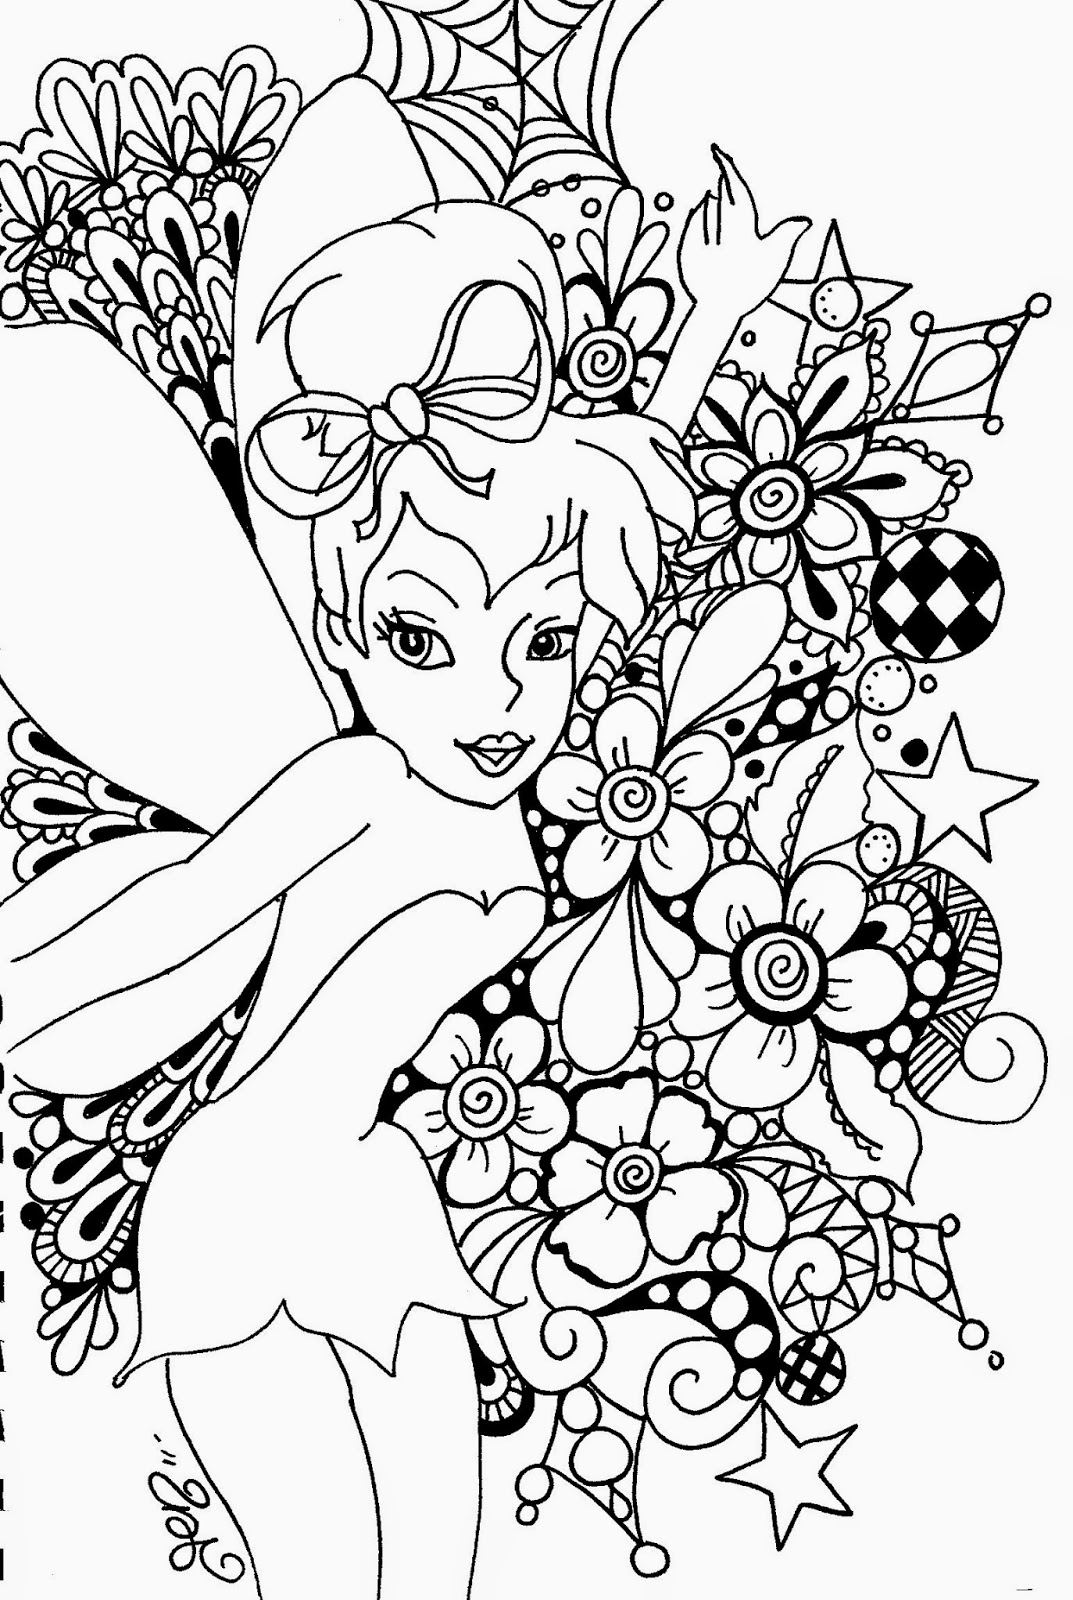 tinkerbell coloring coloring pages tinkerbell coloring pages and clip art coloring tinkerbell 